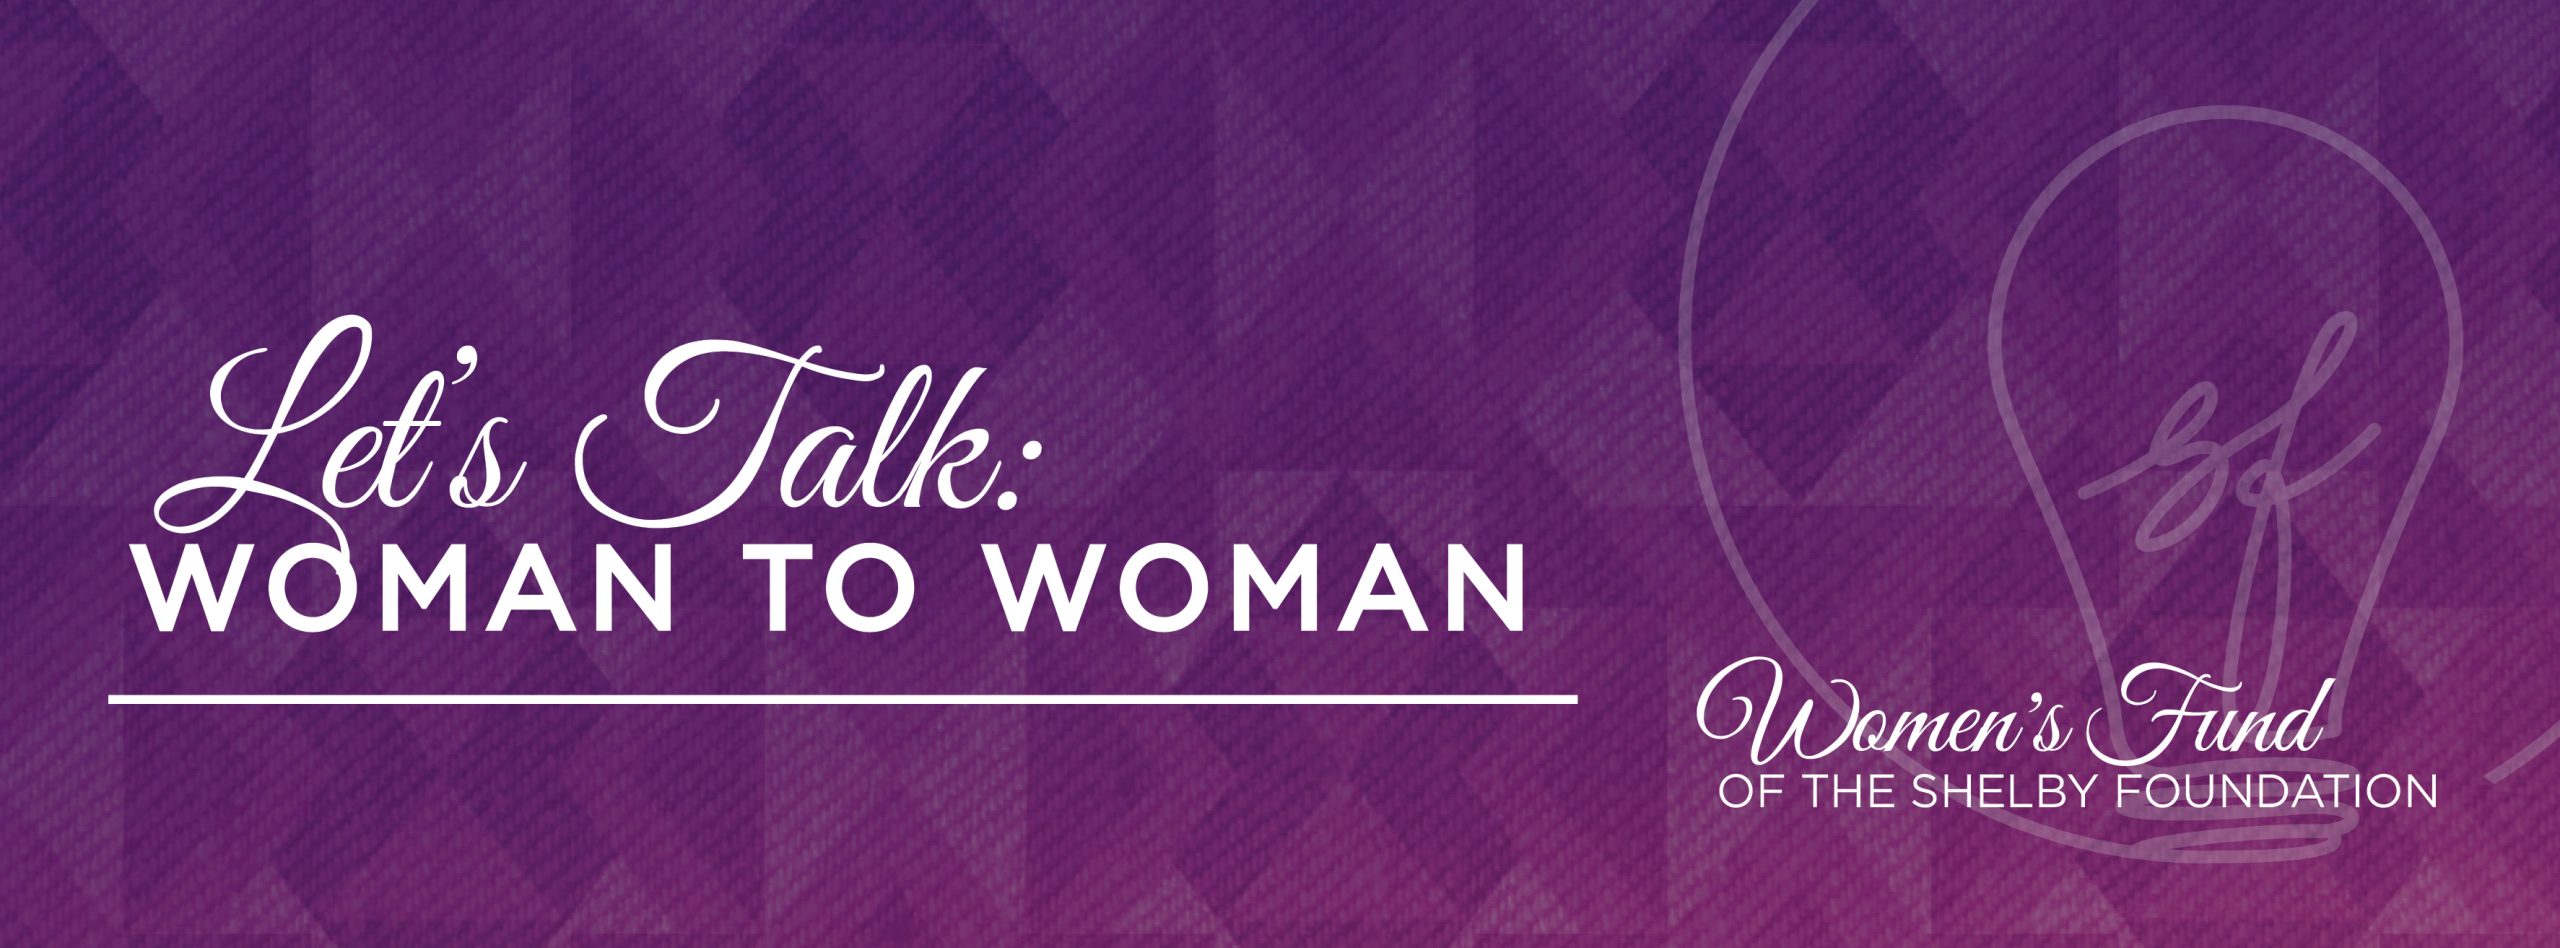 SF Let's talk woman to woman